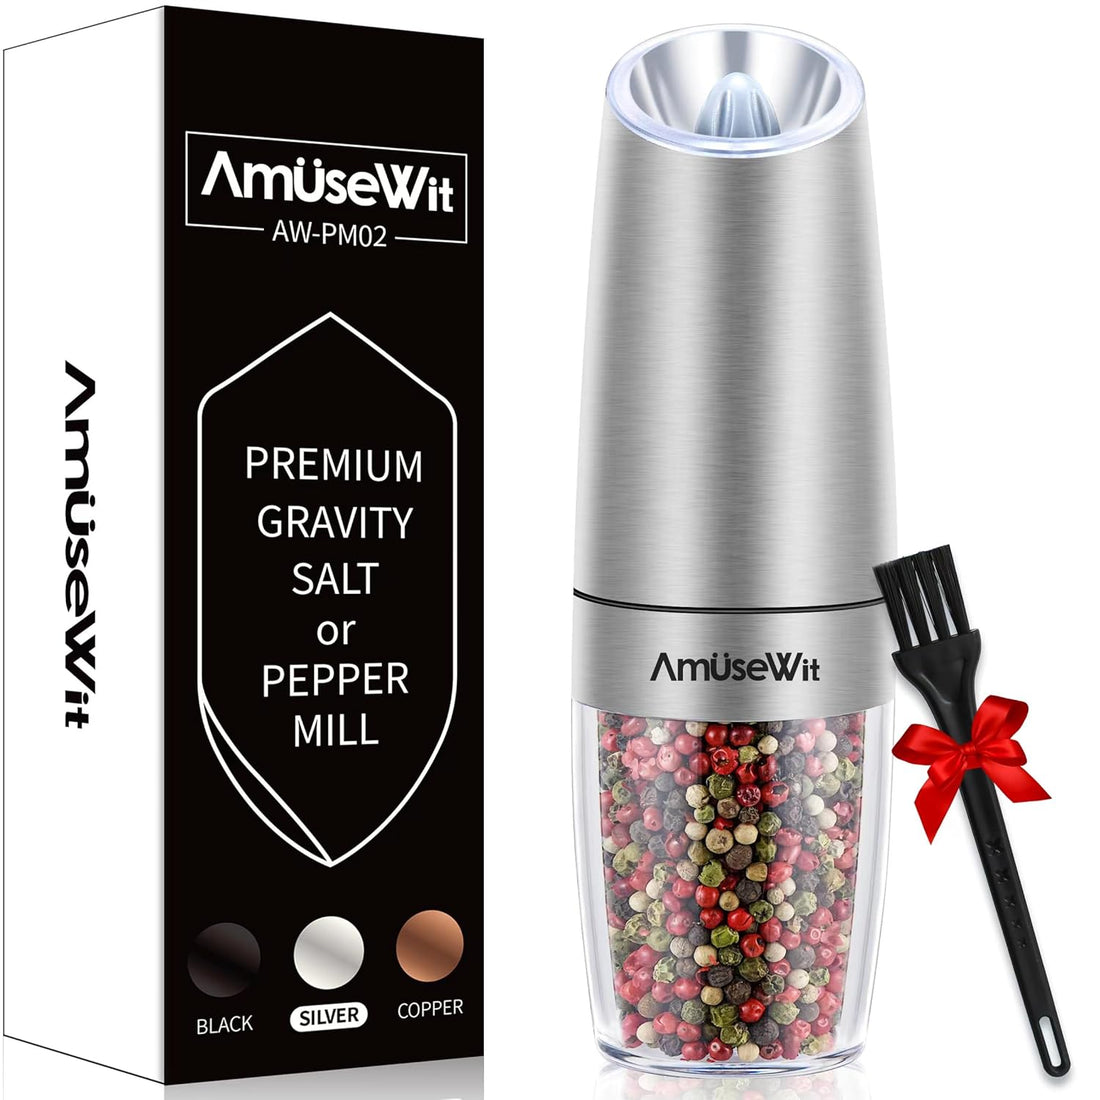 Gravity Electric Pepper Grinder or Salt Grinder Mill - Battery Operated Automatic Pepper Mill with White Light, One Handed Operation, Adjustable Coarseness, Stainless Steel by AmuseWit